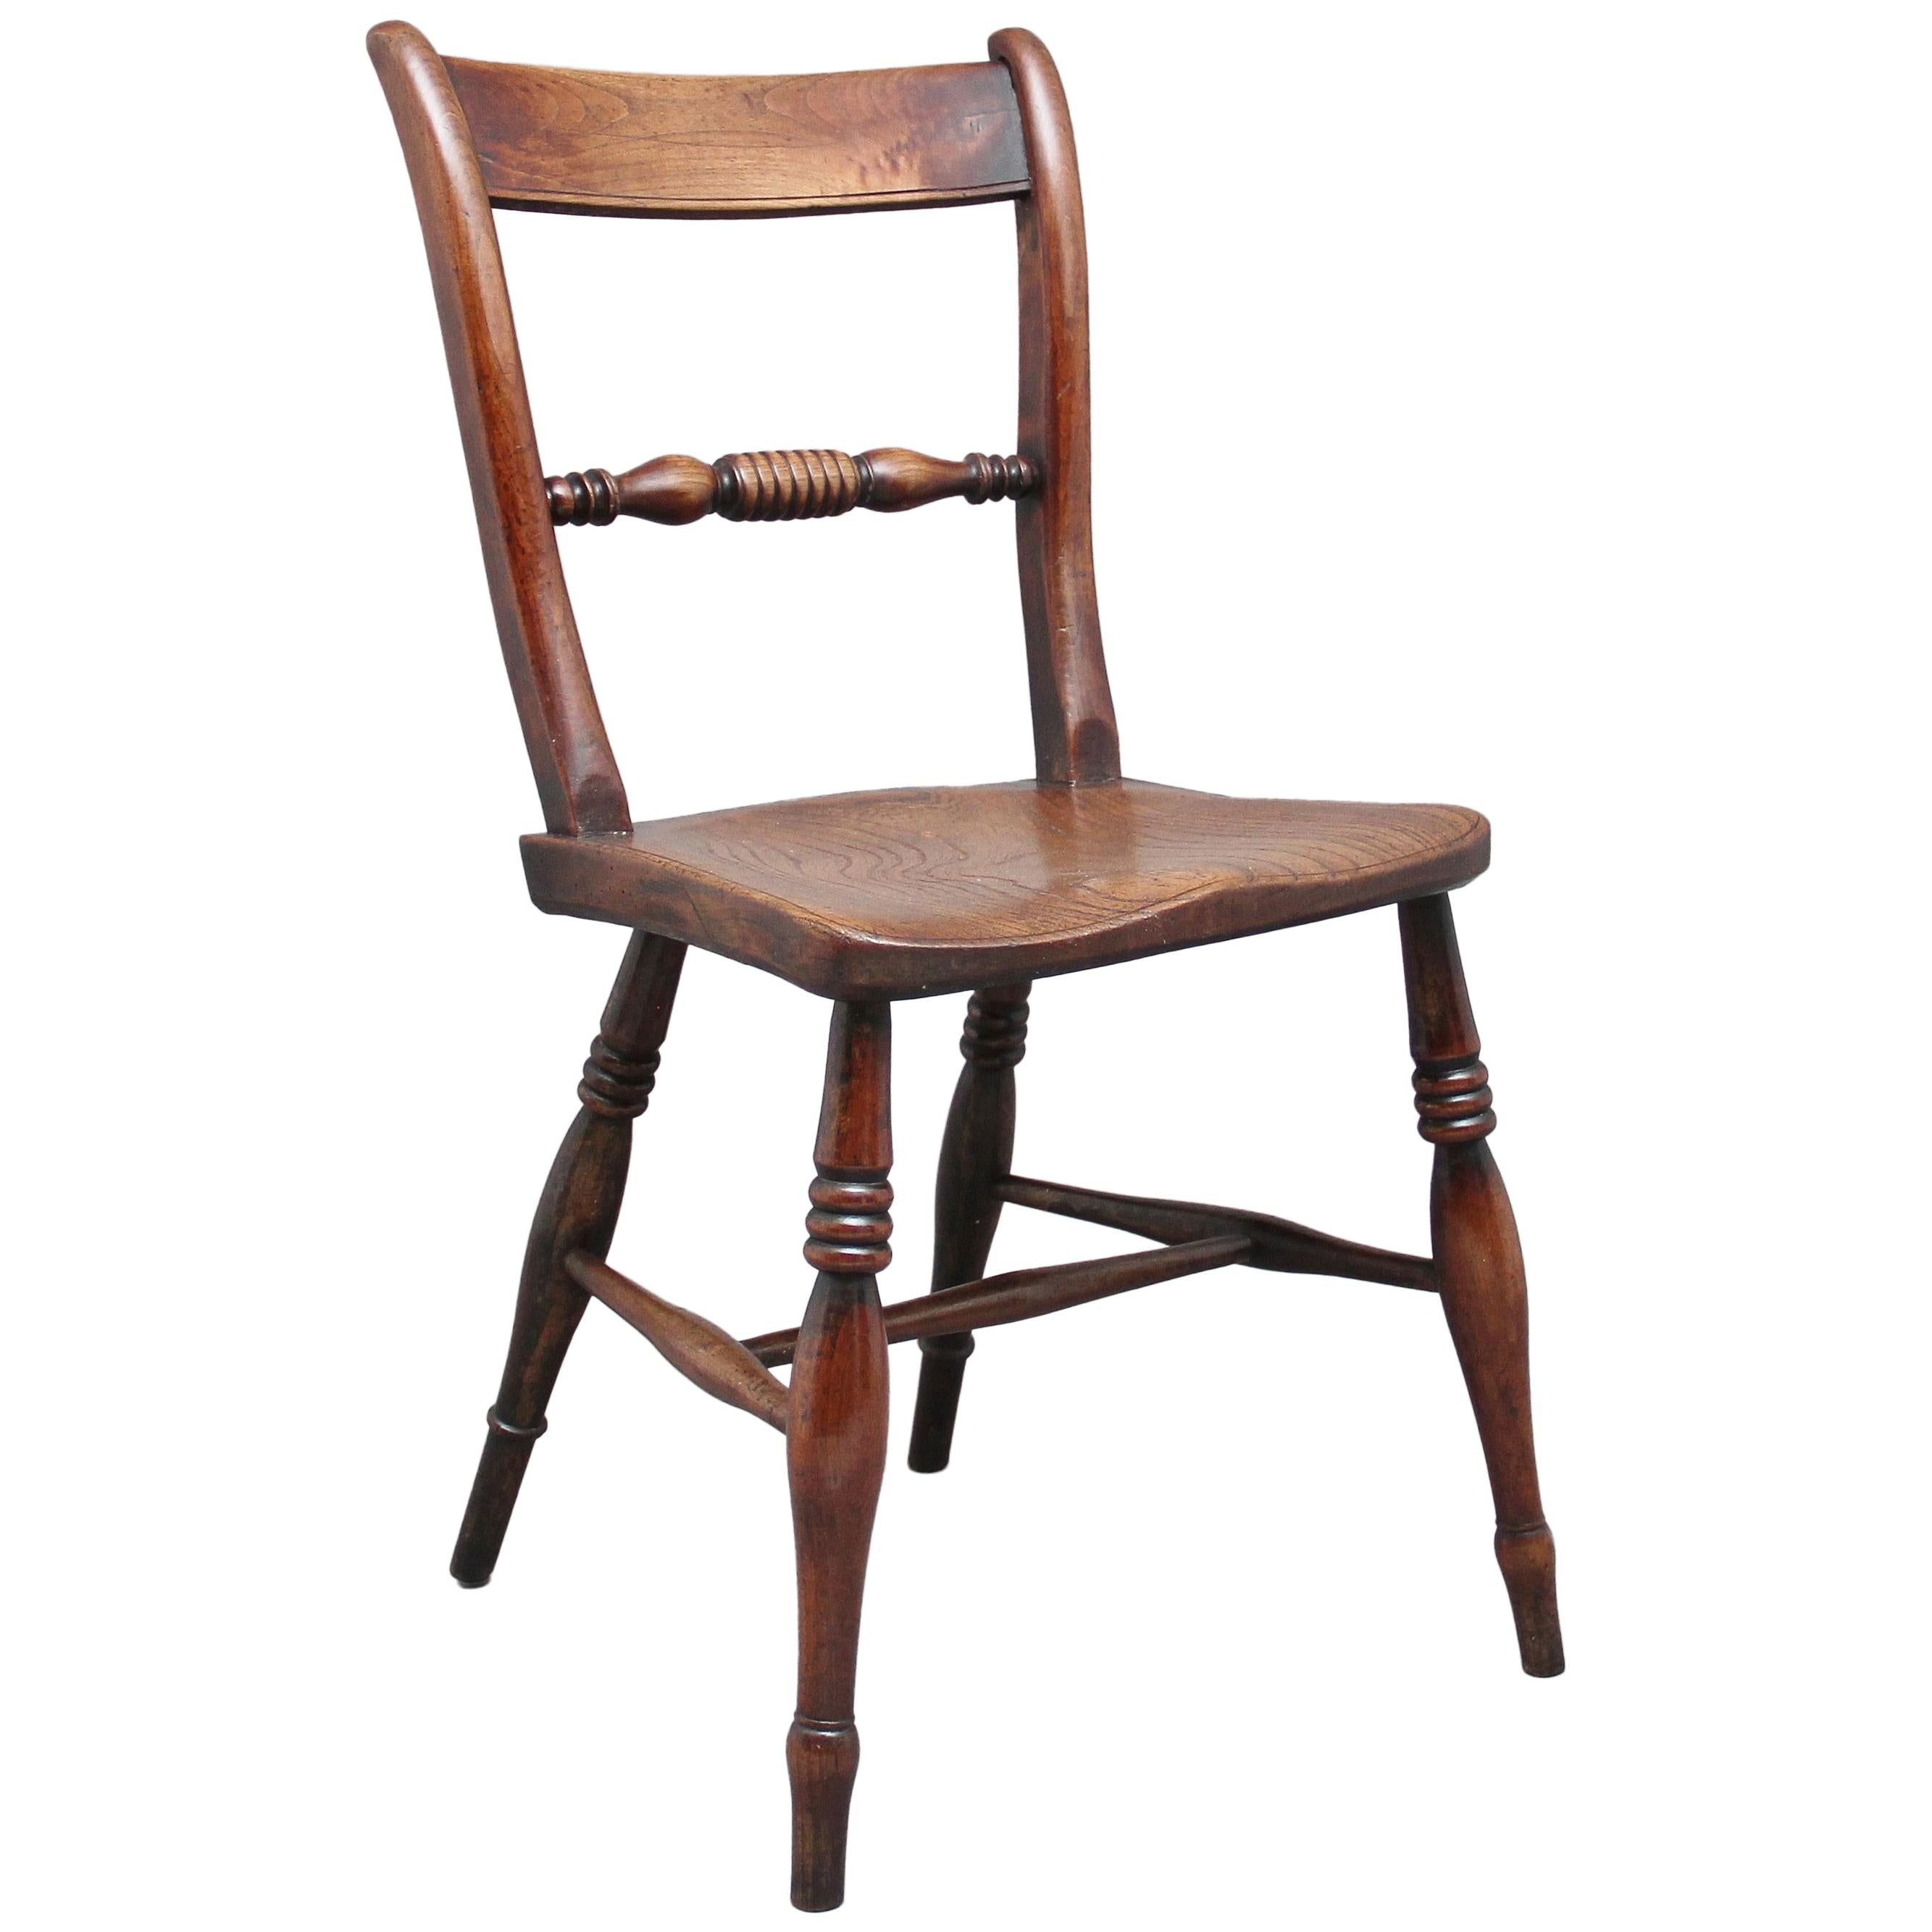 Early 19th Century Elm and Ash Side Chair